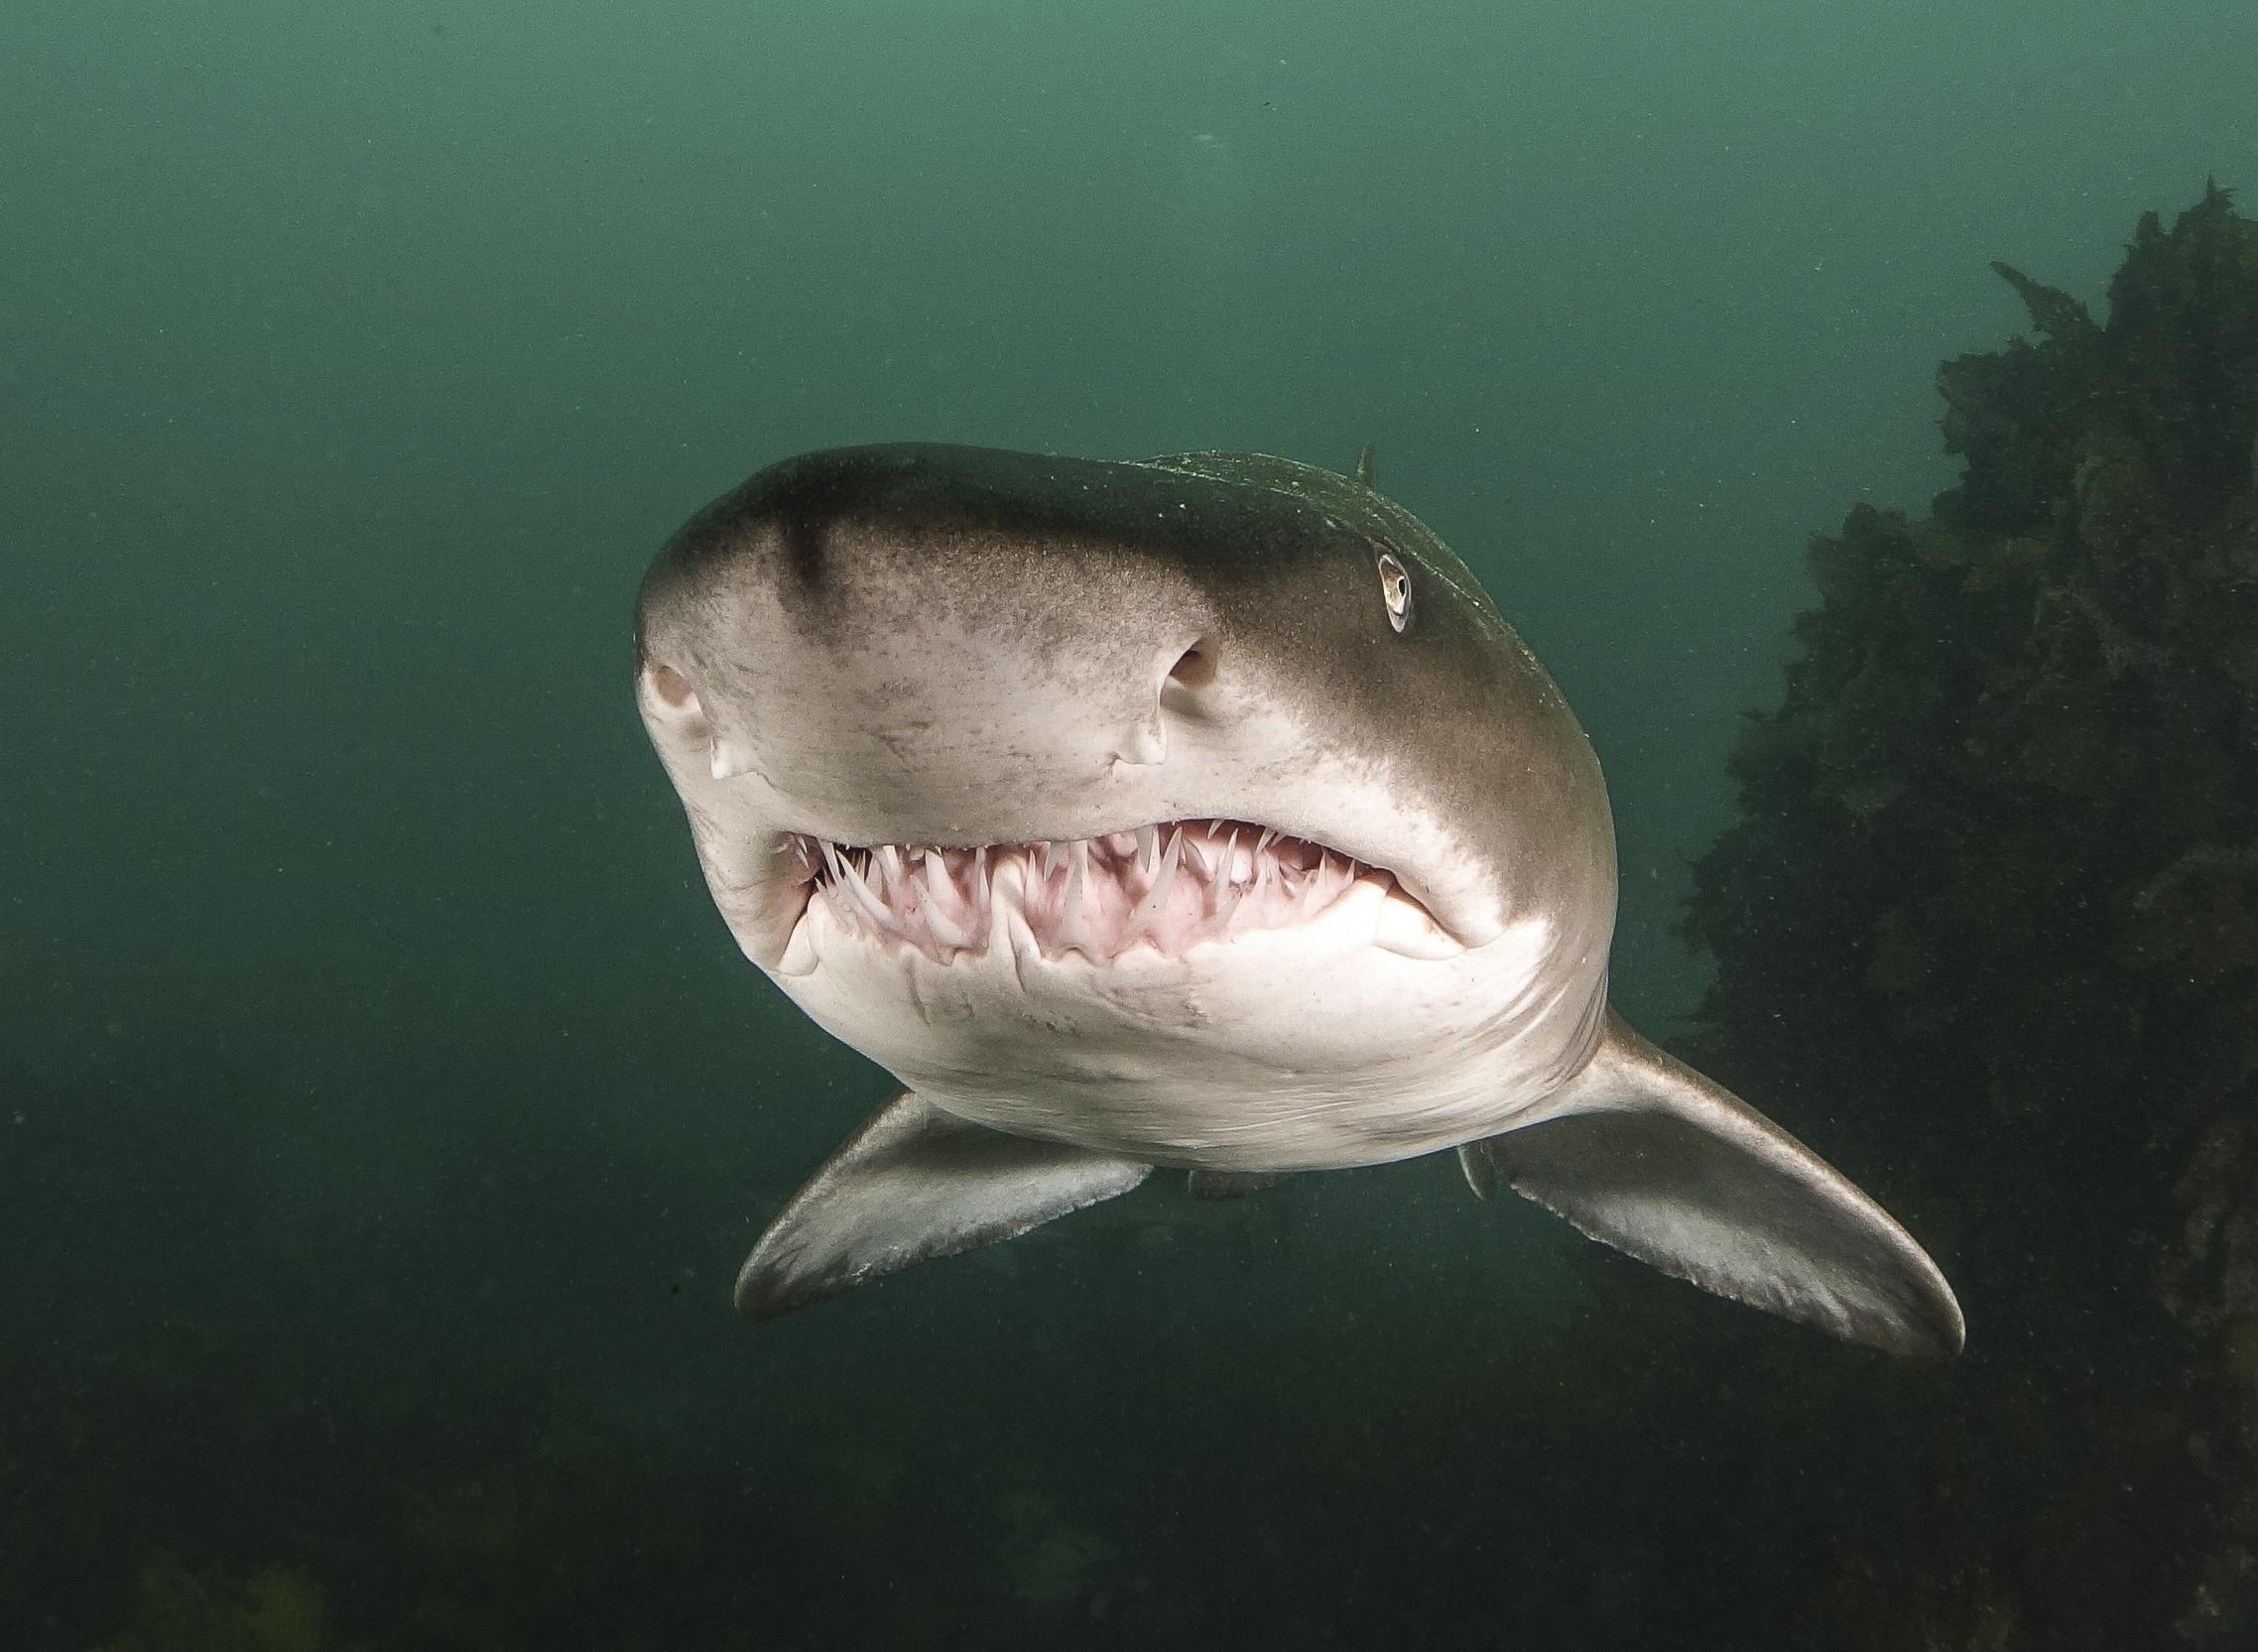 Sand tiger shark looks directly at the camera.